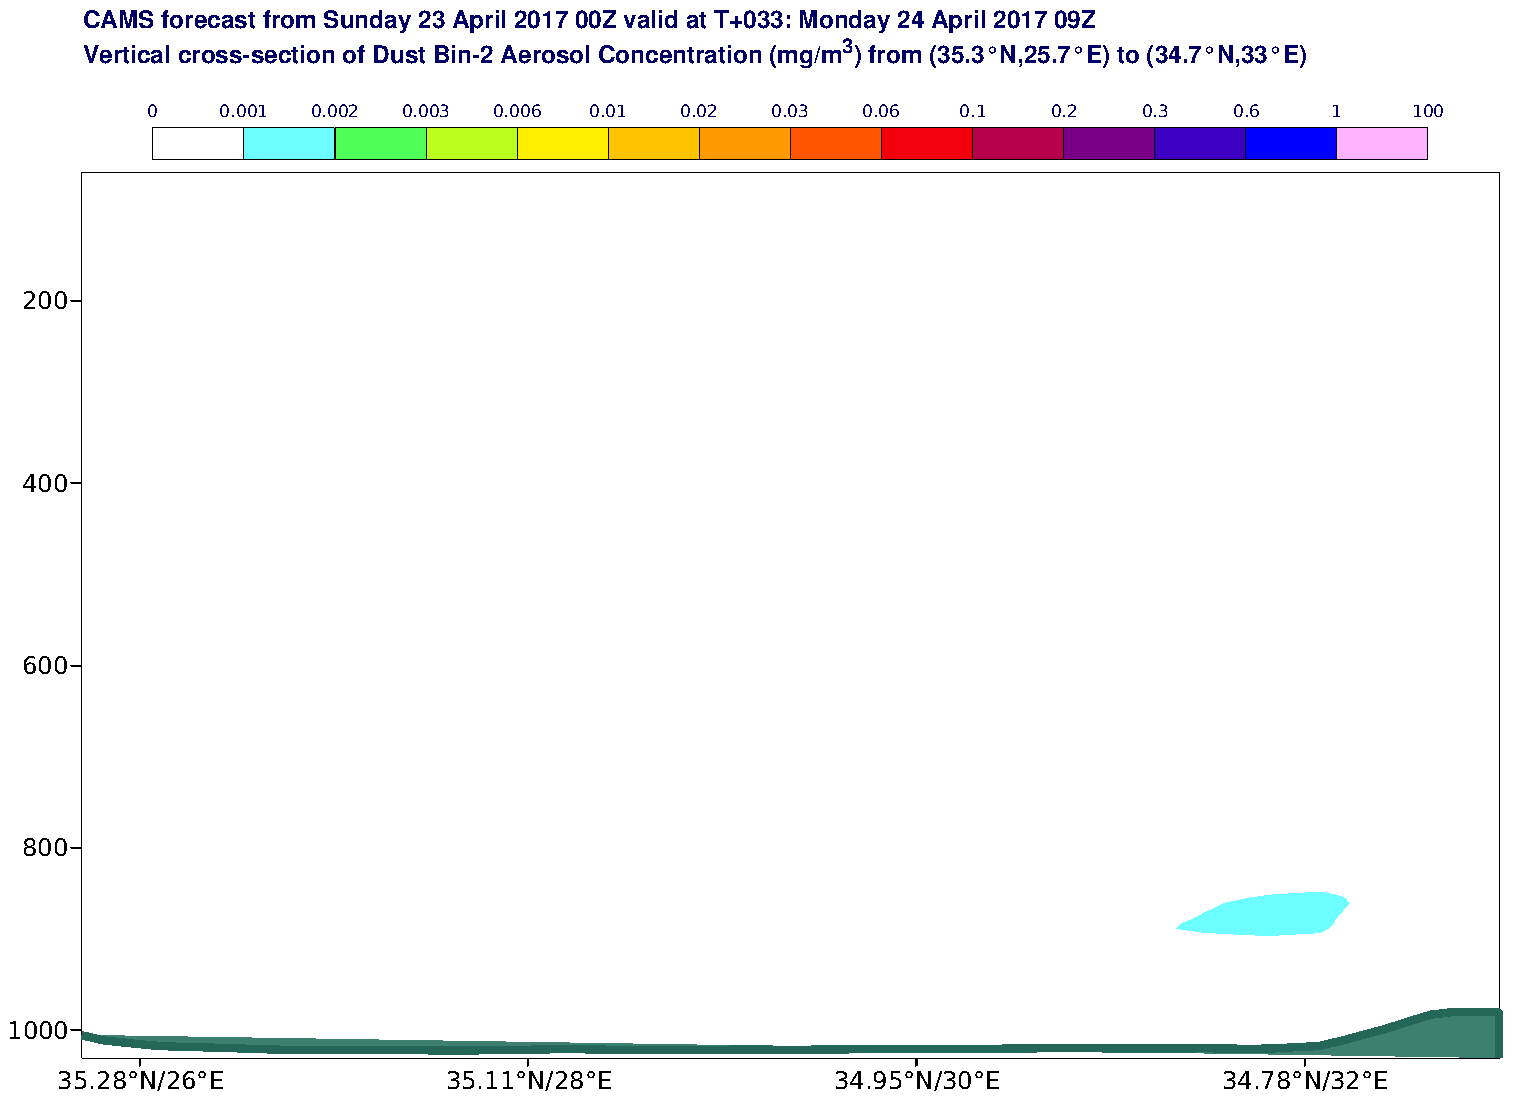 Vertical cross-section of Dust Bin-2 Aerosol Concentration (mg/m3) valid at T33 - 2017-04-24 09:00